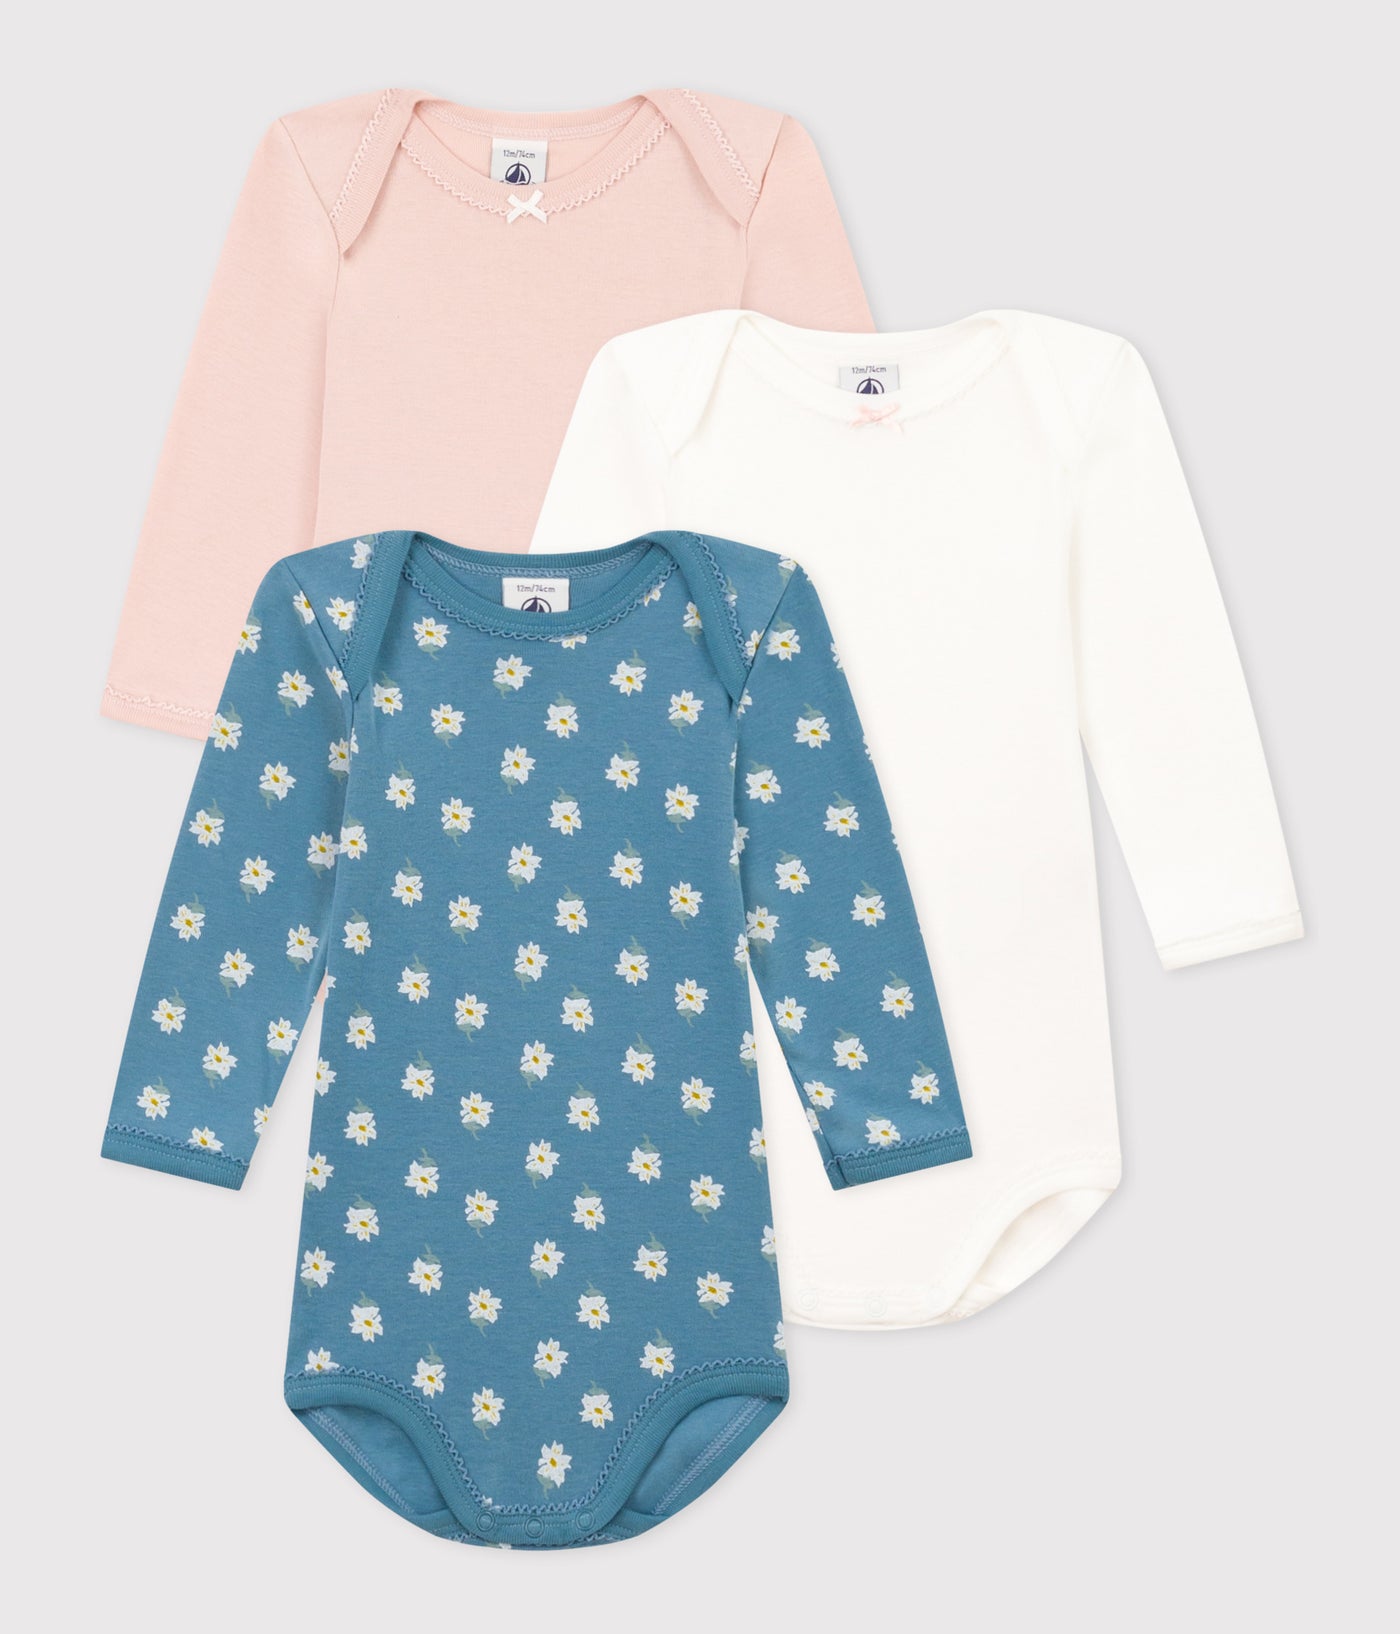 BABIES' FLORAL LONG-SLEEVED COTTON BODYSUITS - 3-PACK